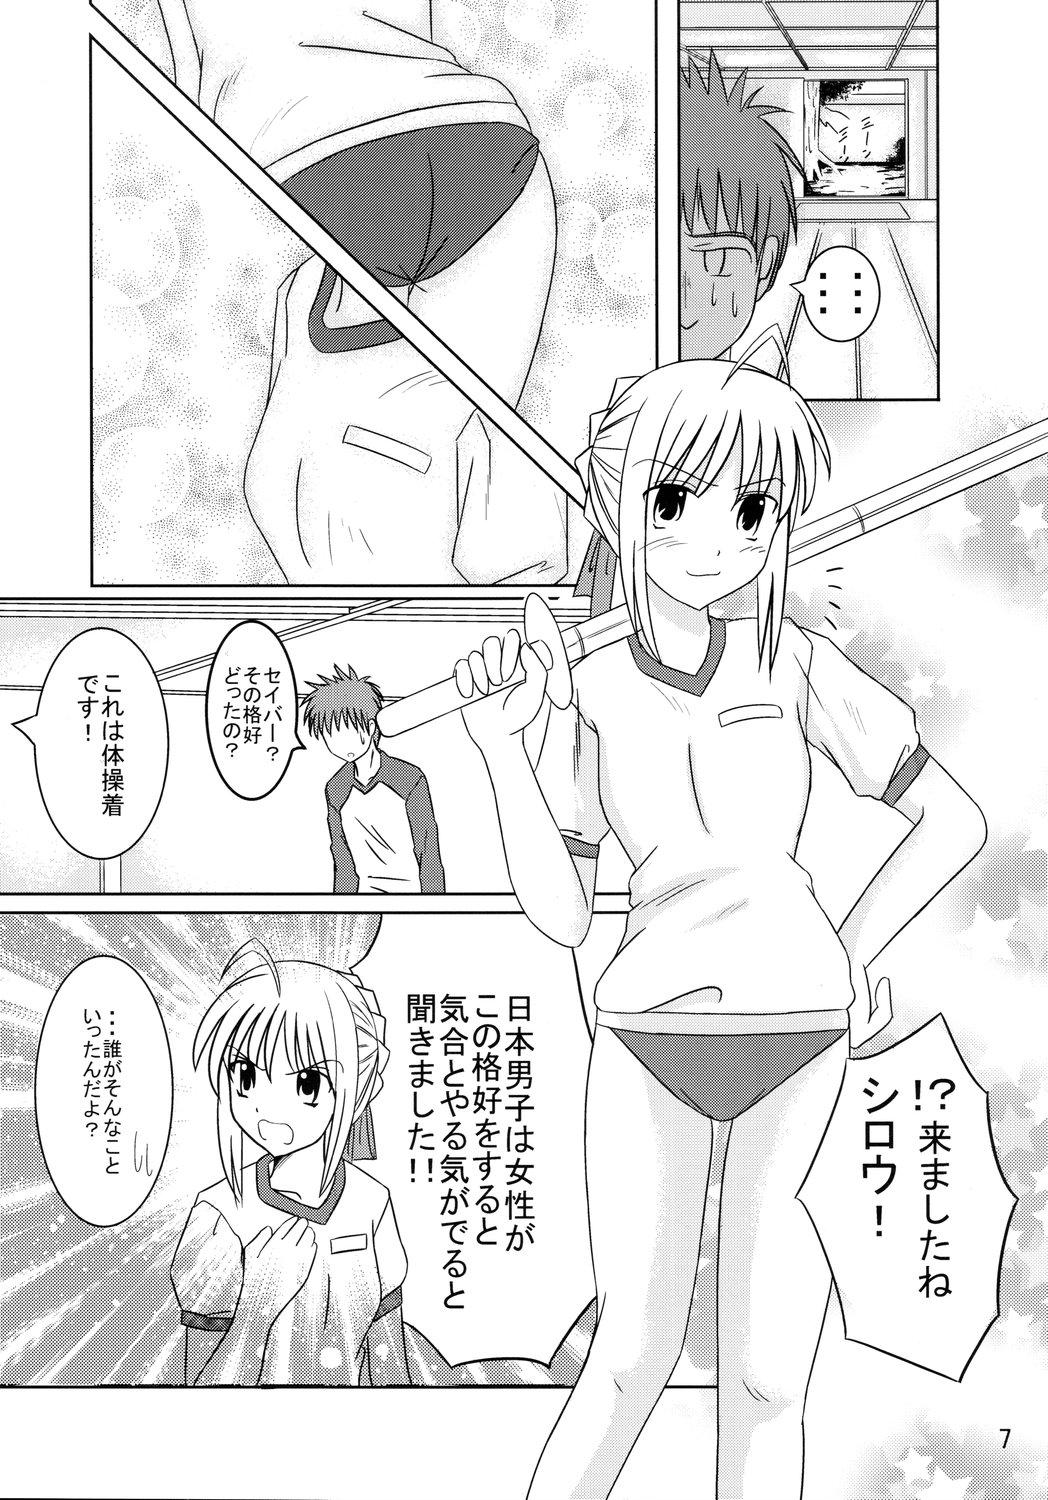 Tanga Saber Of Sanity - Fate stay night Shower - Page 6